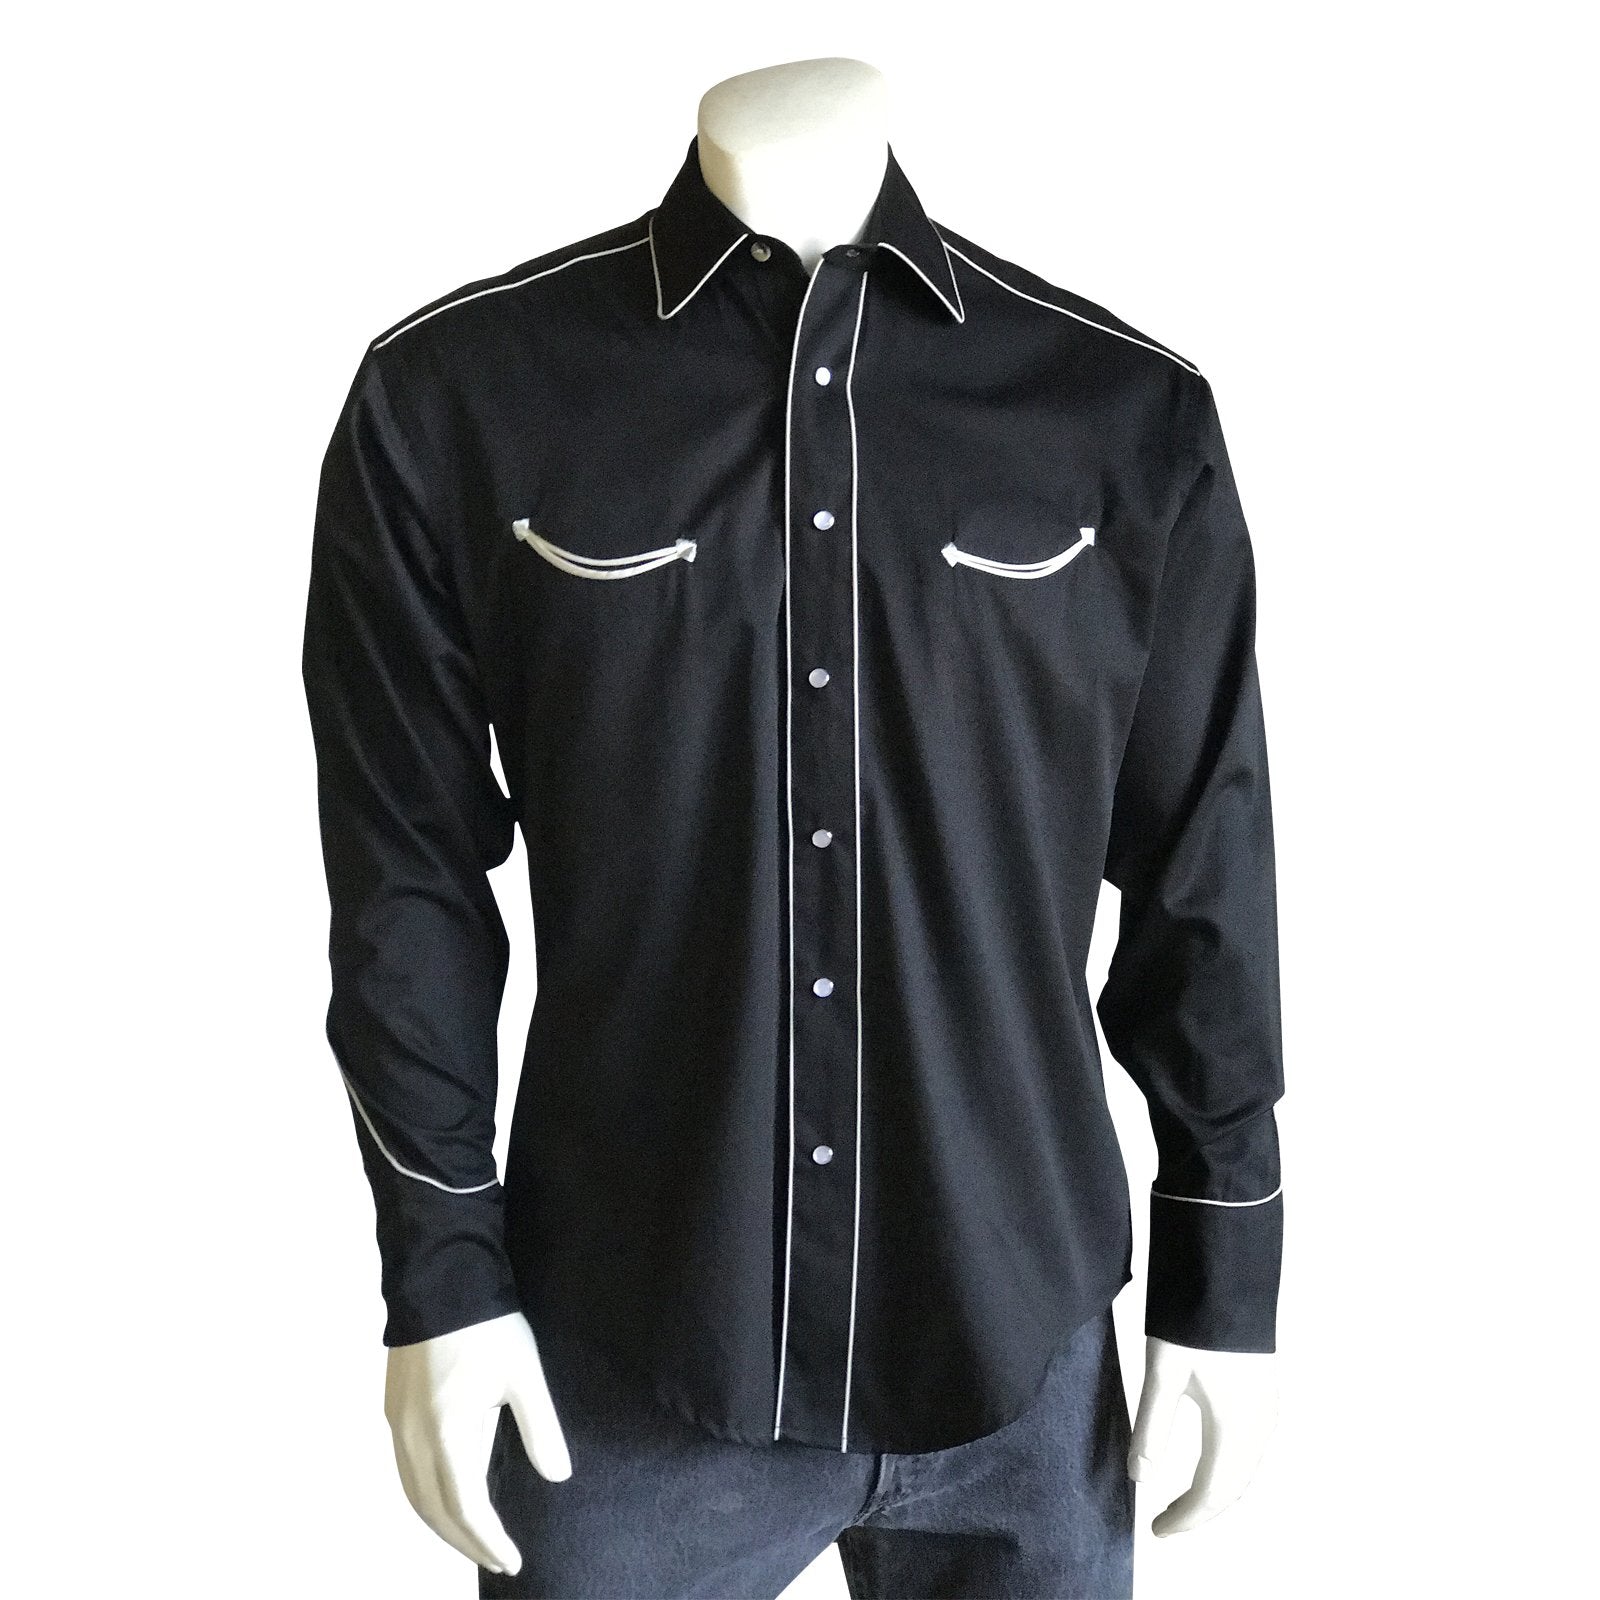 Rockmount Ranch Wear Men's Retro Shirt with Piping Black 